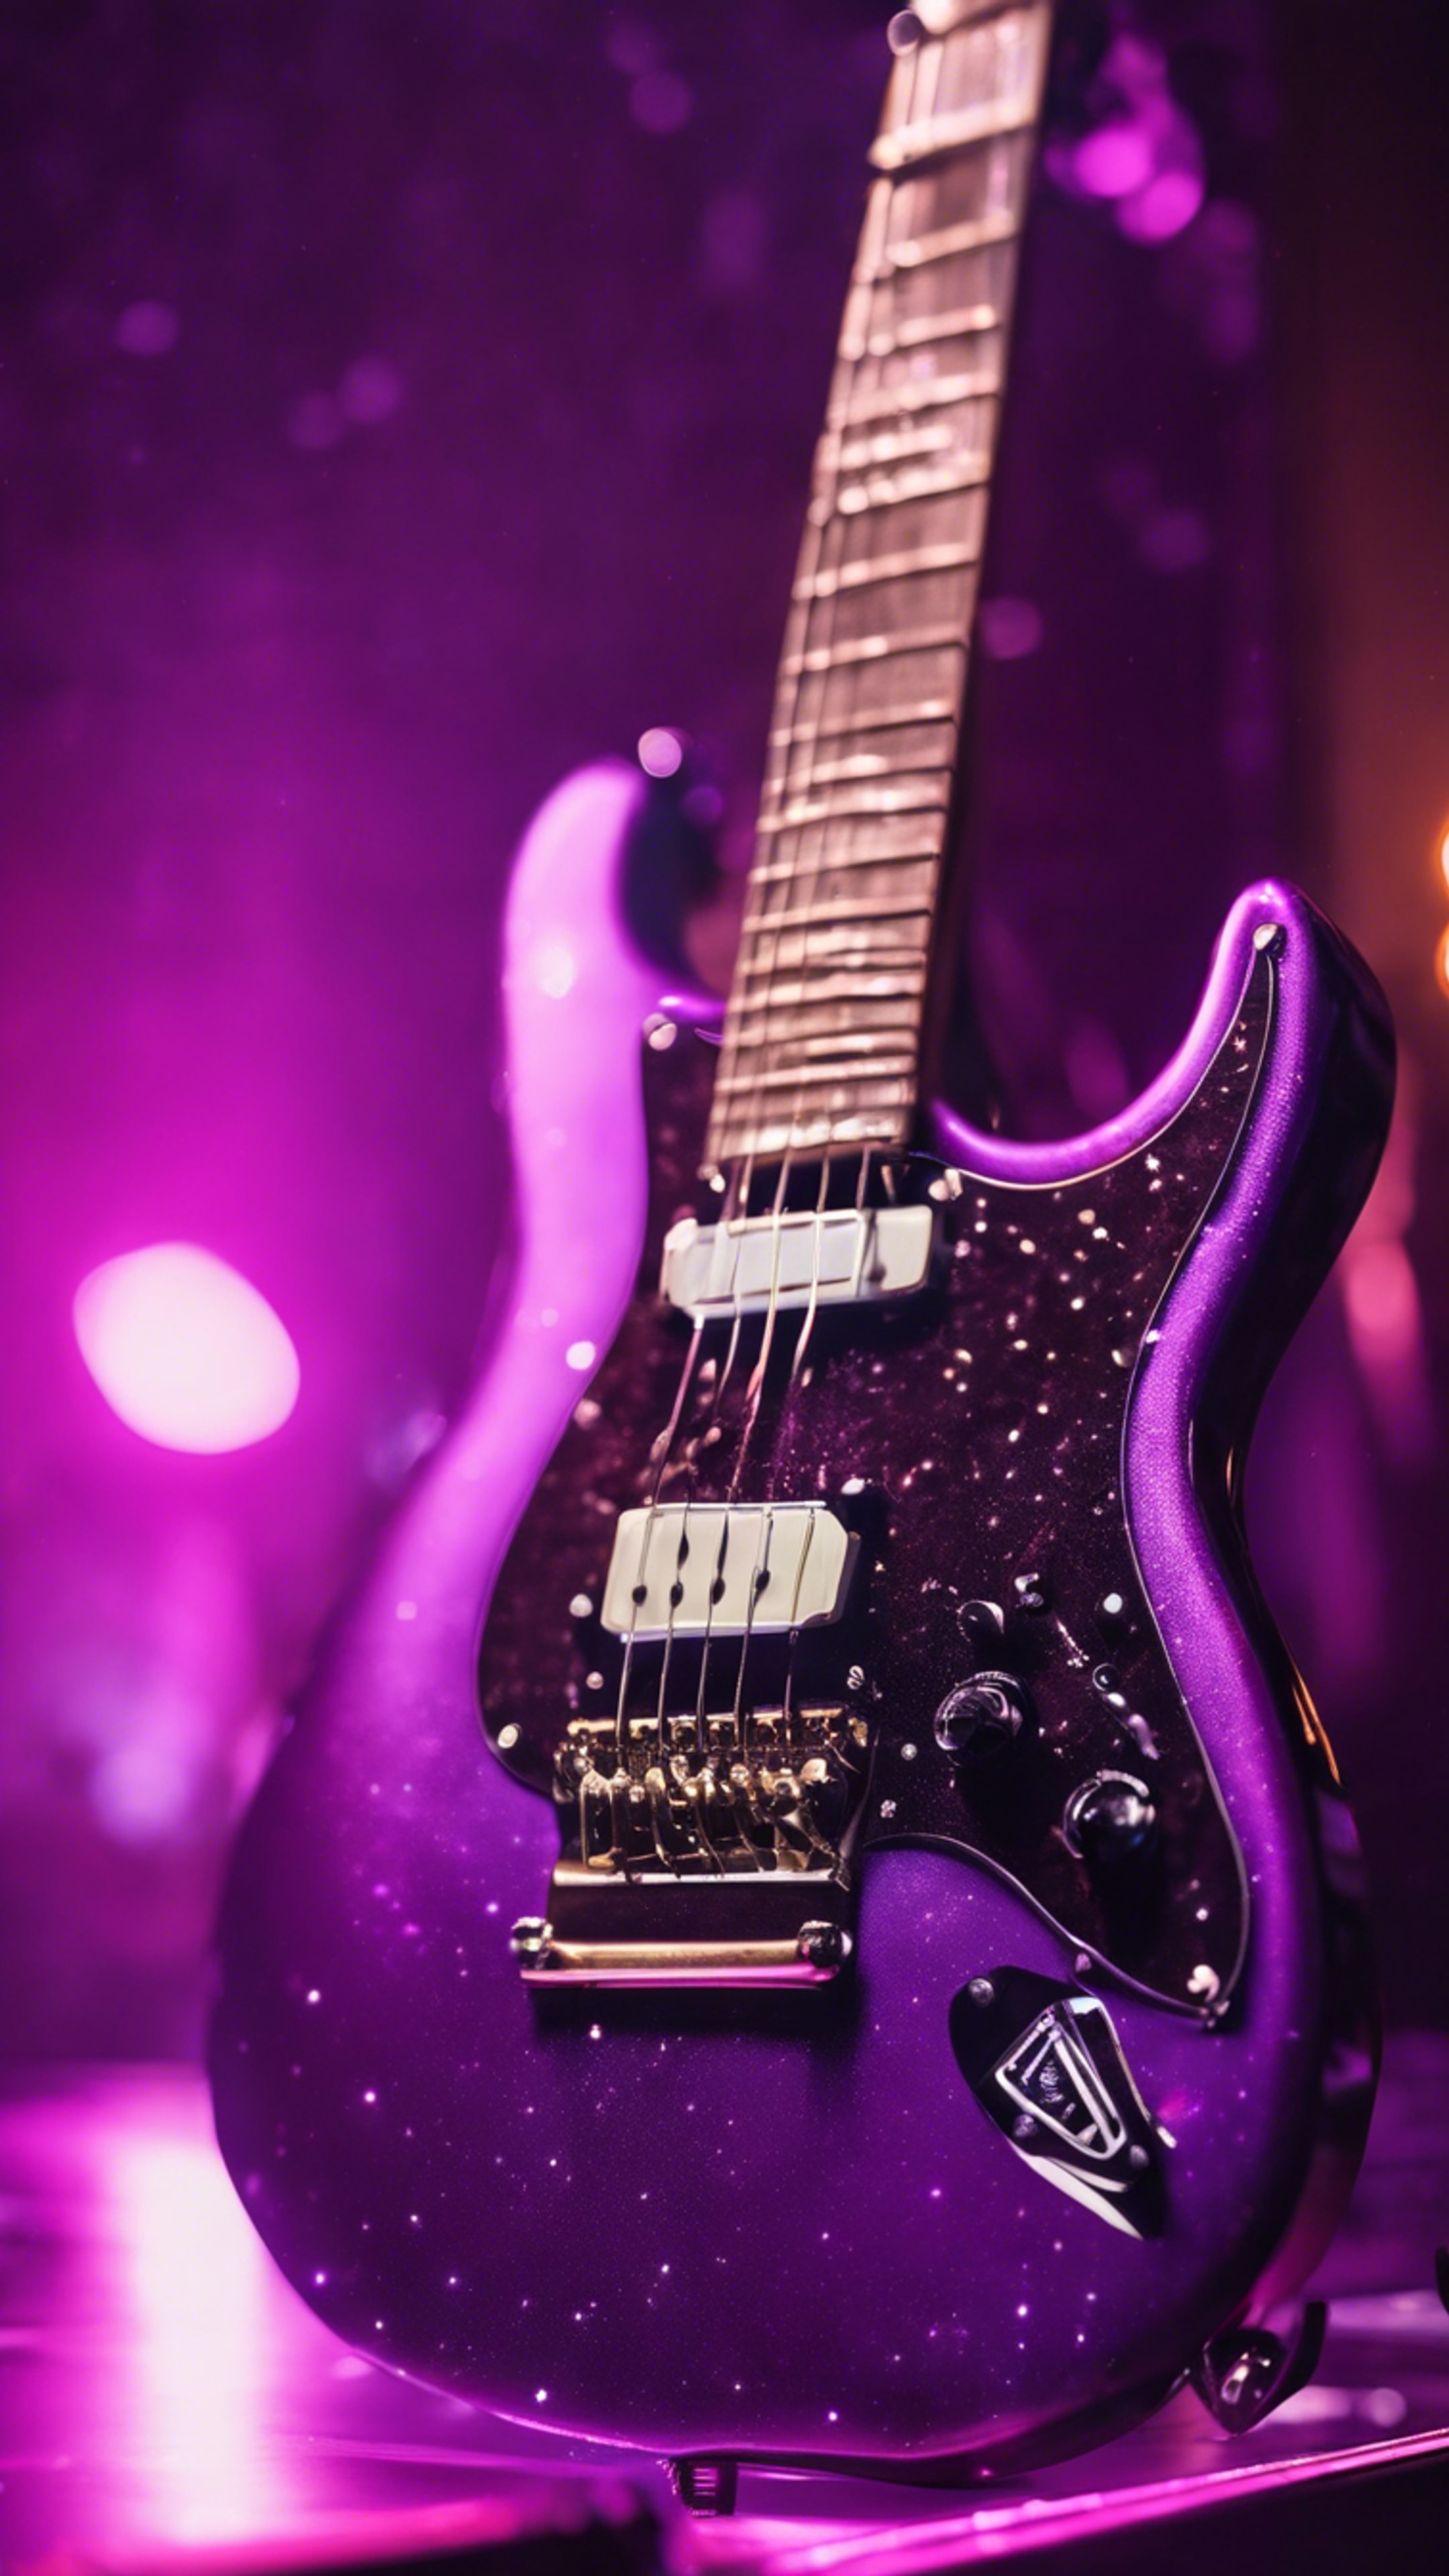 An electric guitar, finished in a glossy neon purple, under the cool stage lights of a concert. Tapet[e32ffa723fc740a5910d]